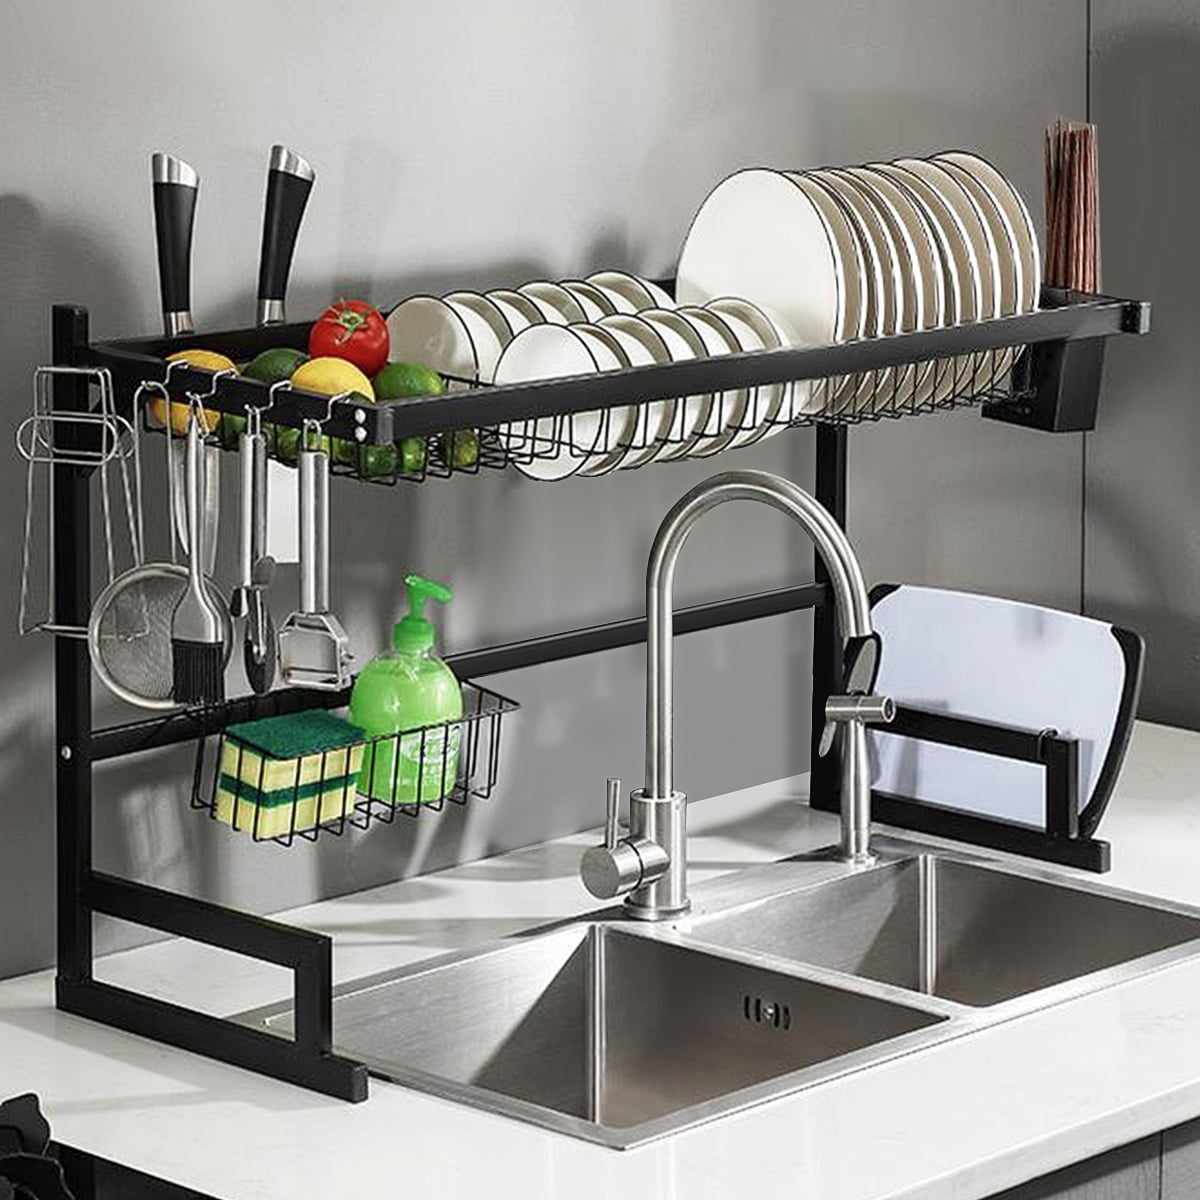 Stainless Steel 2 Tier Dish Drying Rack - Over Sink, Drainer Shelf Over The Sink Stainless Steel Dish Rack